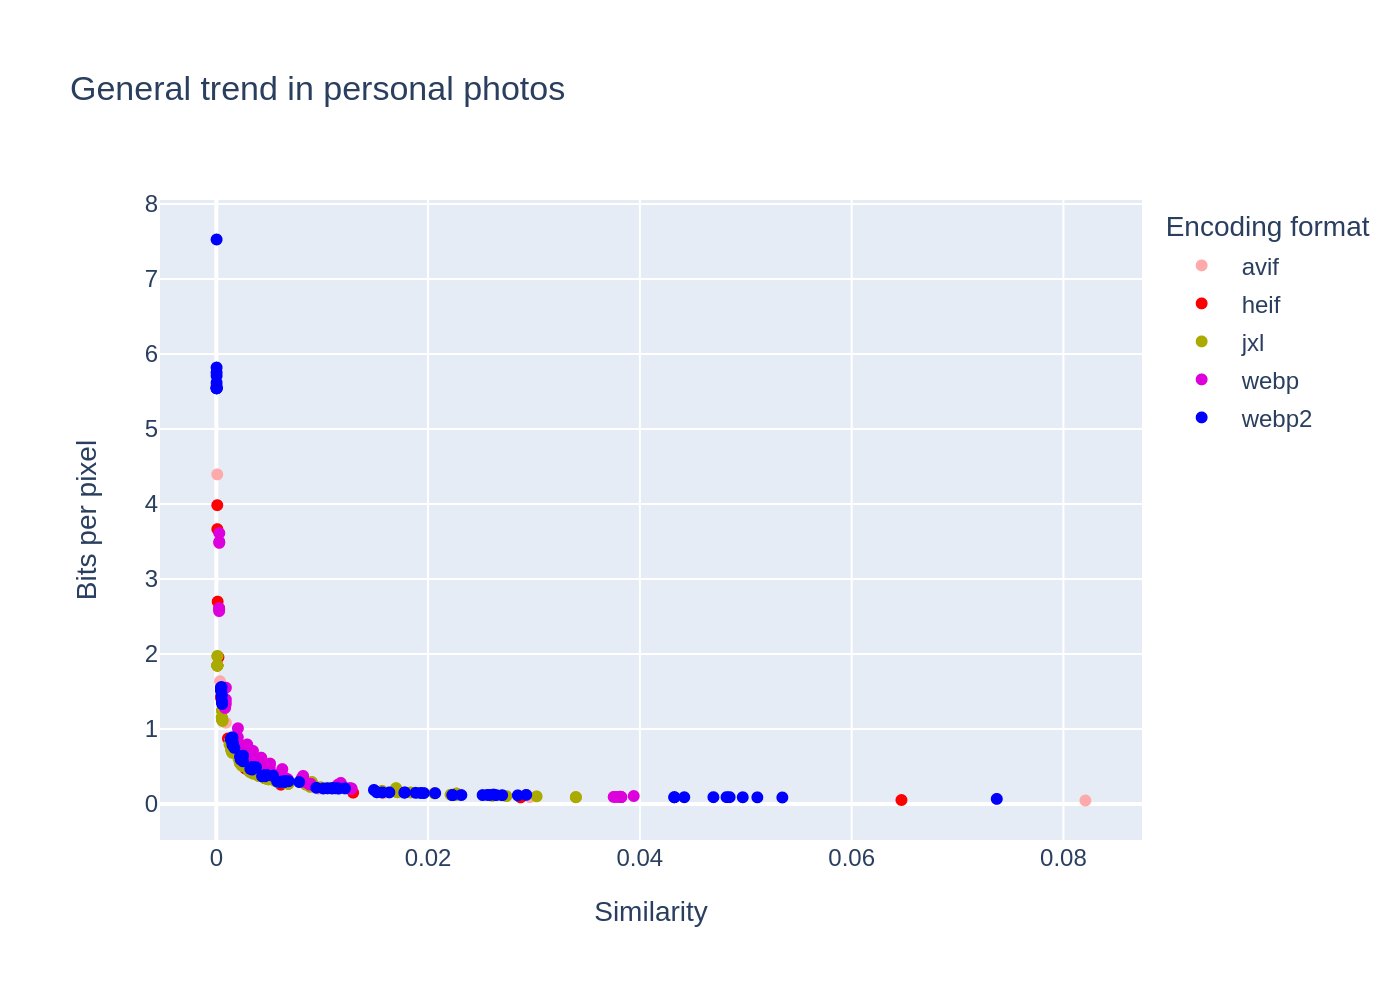 General trend in personal photos, compression ratio as a function of quality for different image formats